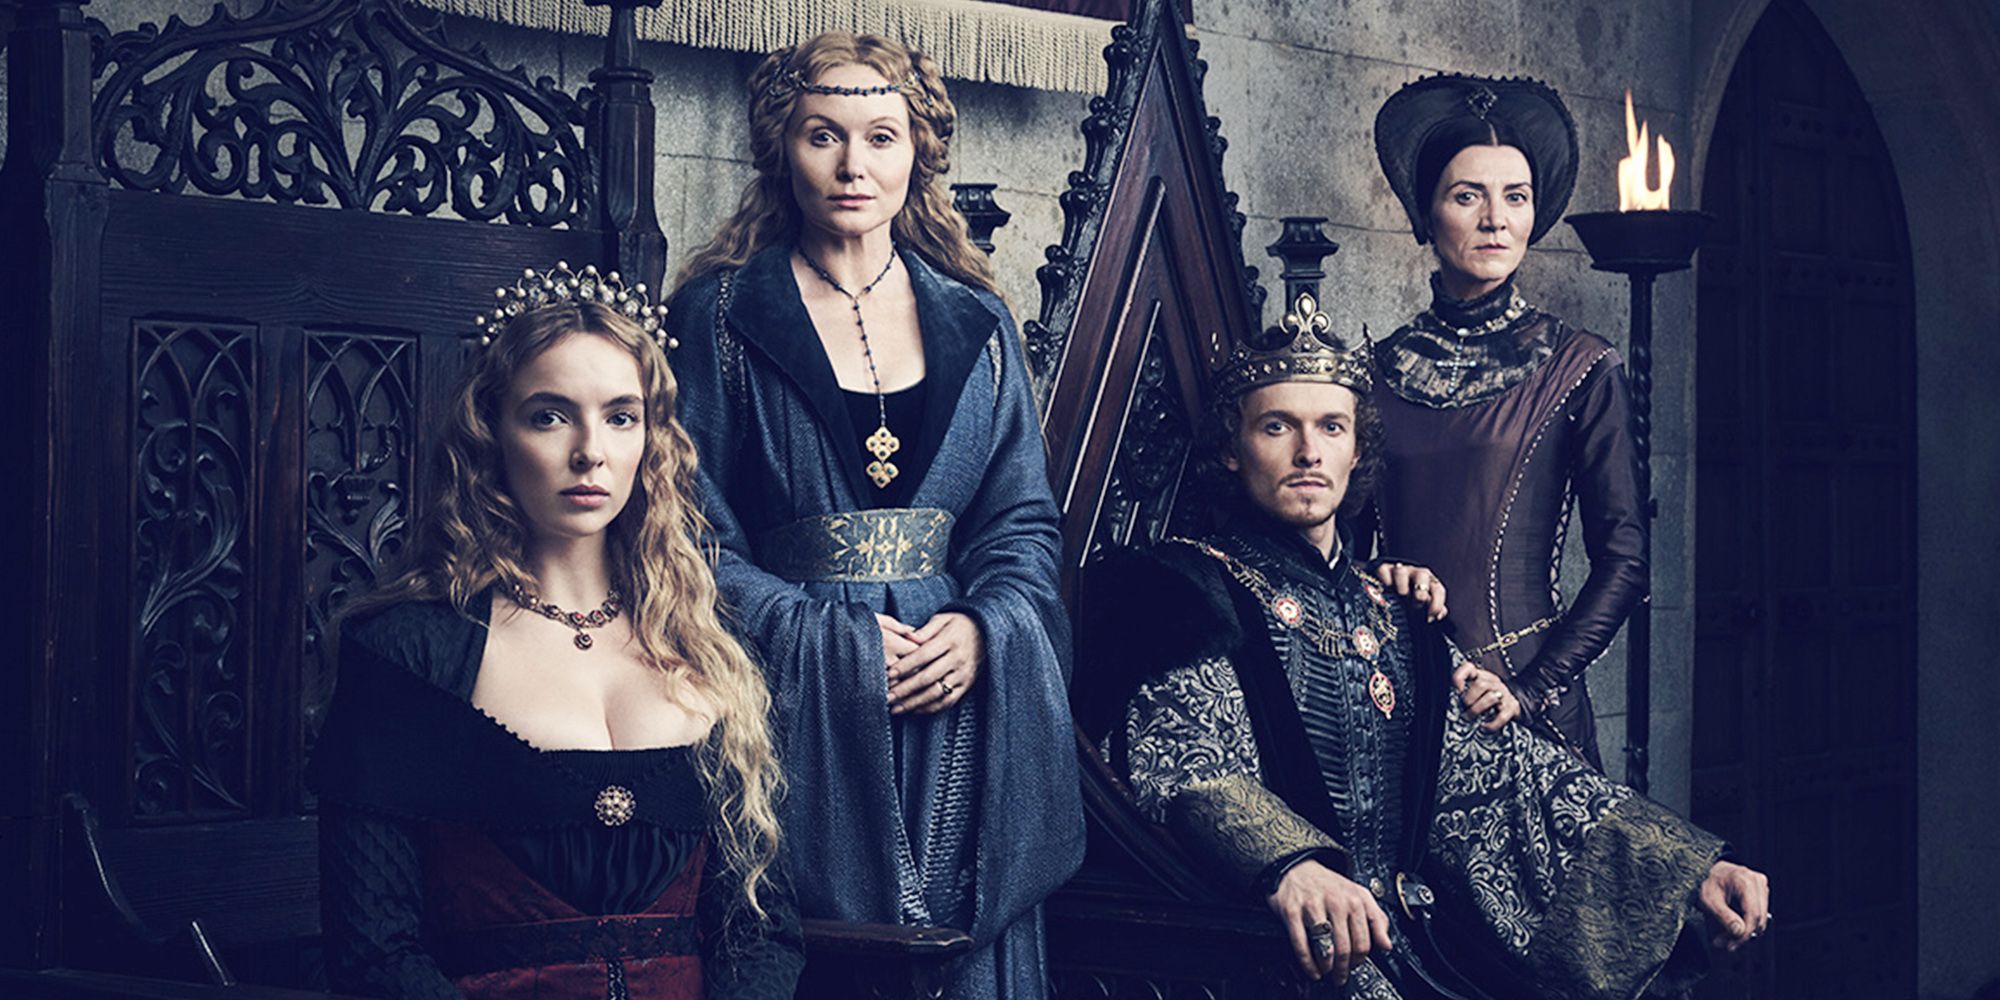 A woman and a man are poised on two thrones beside each other, and their mothers each stand behind them individually.